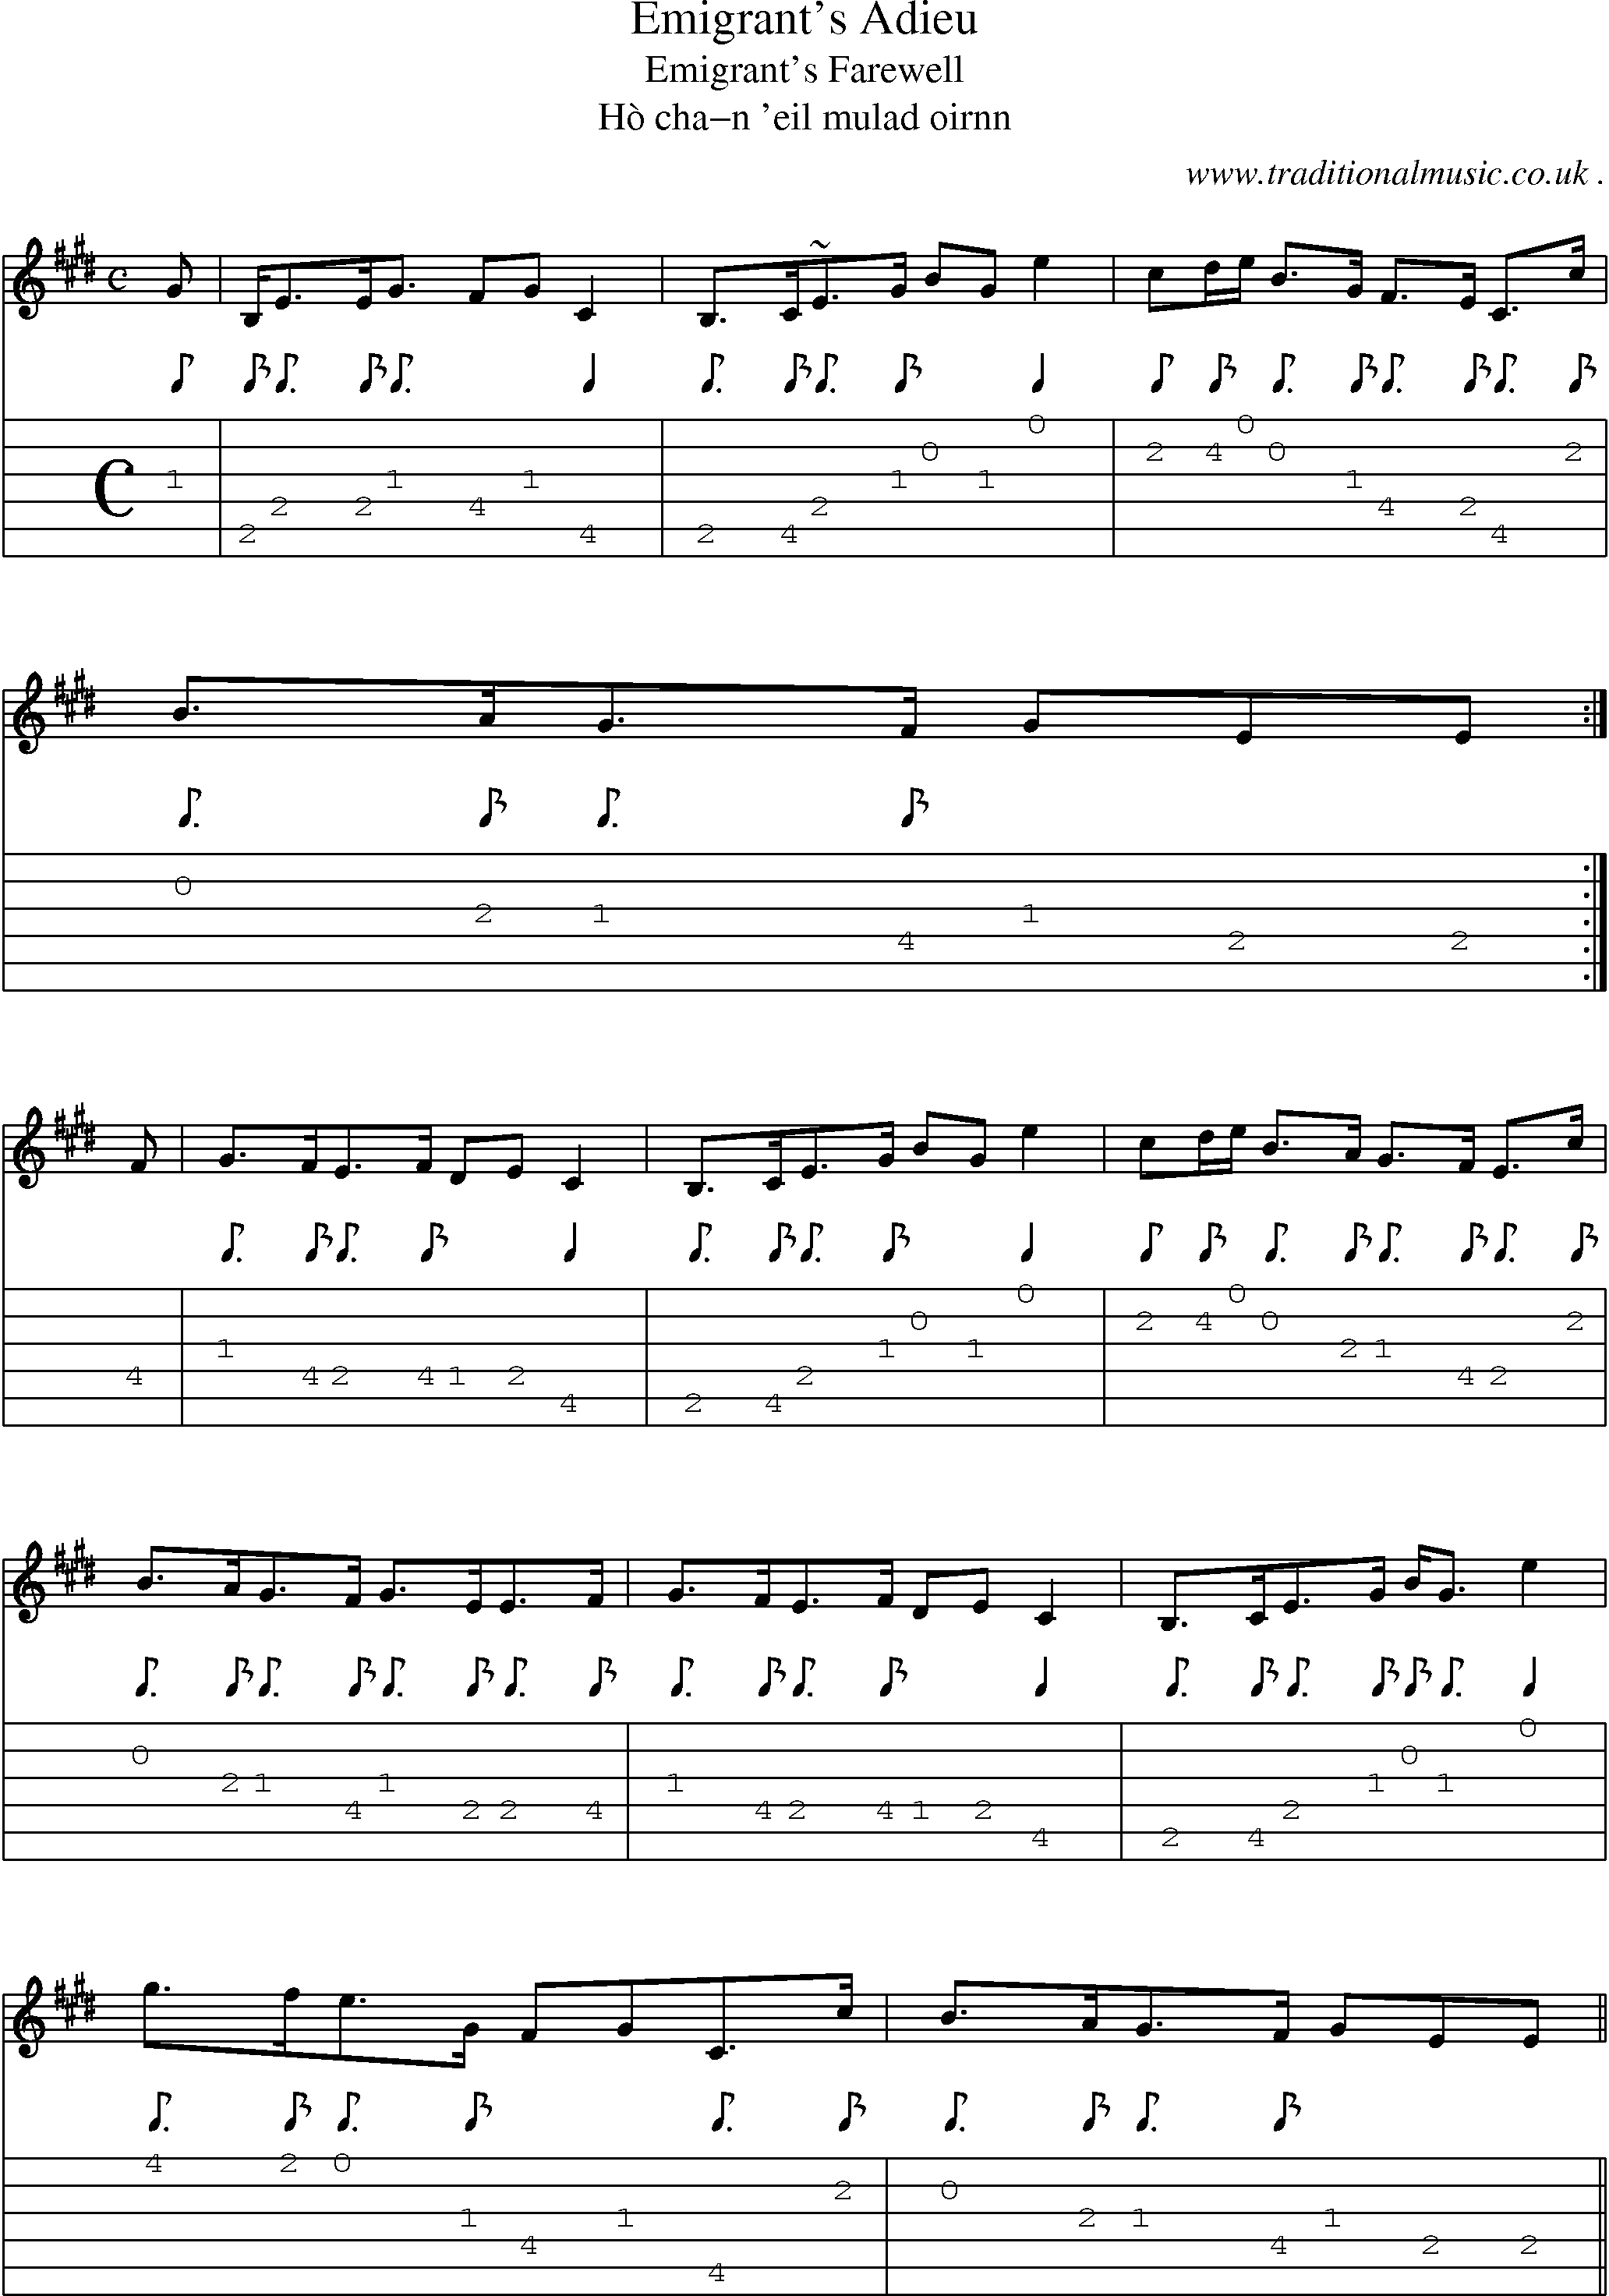 Sheet-music  score, Chords and Guitar Tabs for Emigrants Adieu